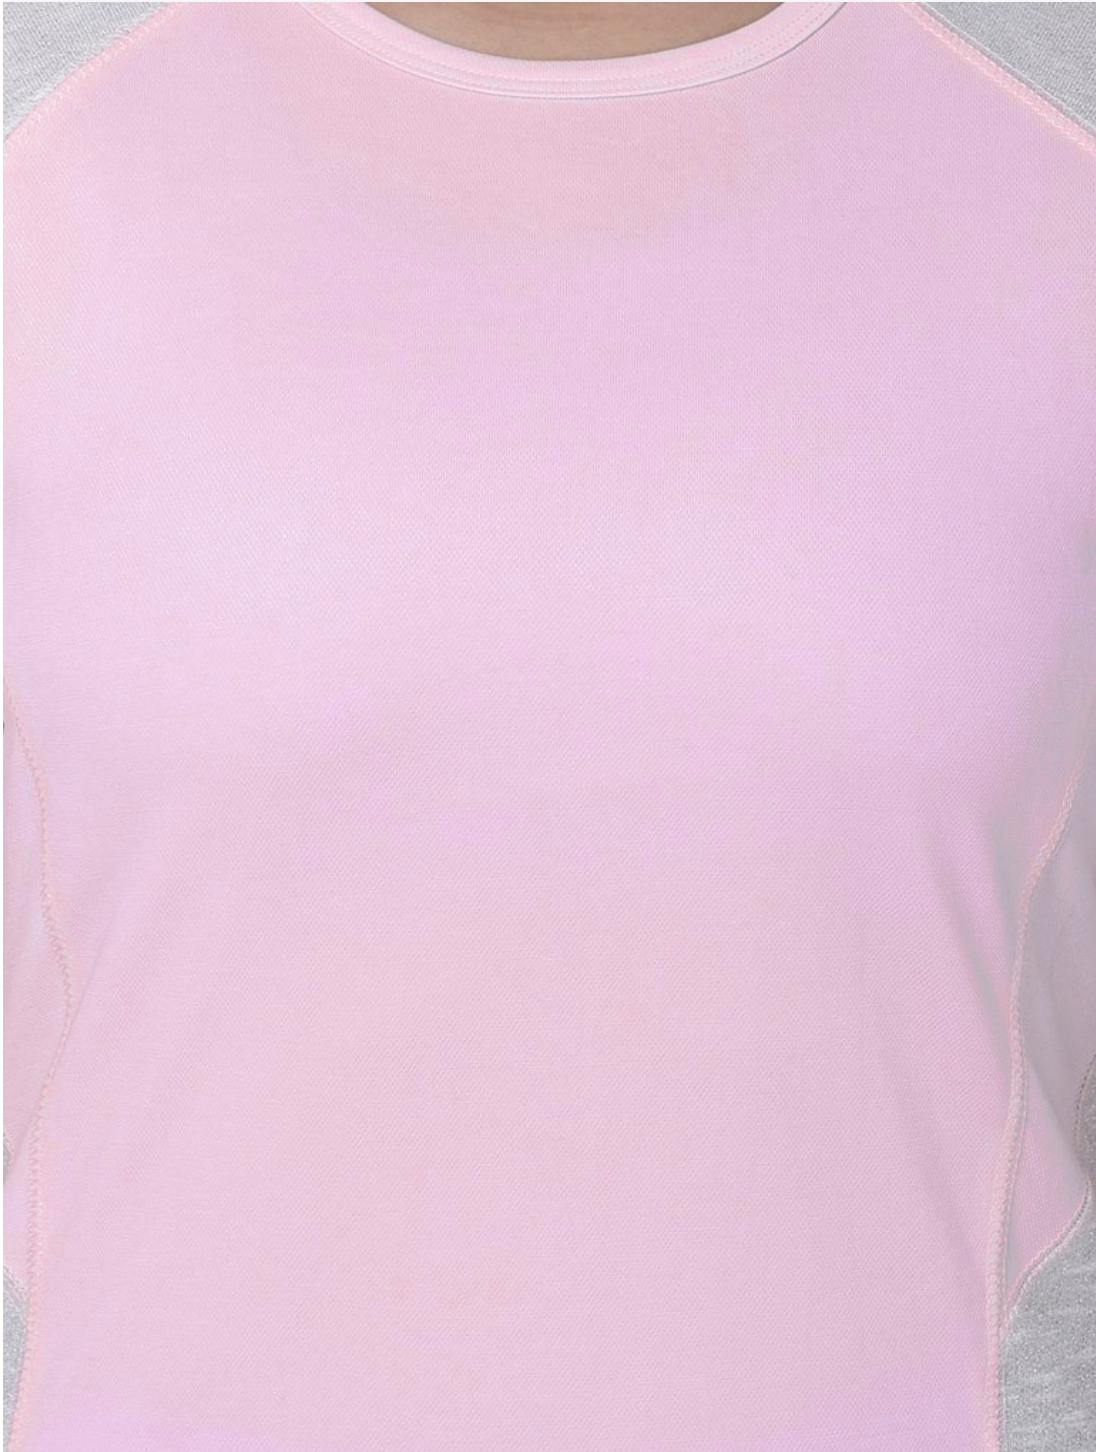 Pink Silver Oh-So-Smart Tee